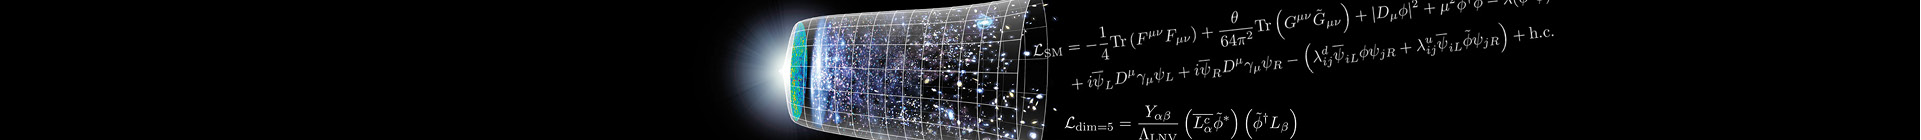 Theoretical Astroparticle Physics